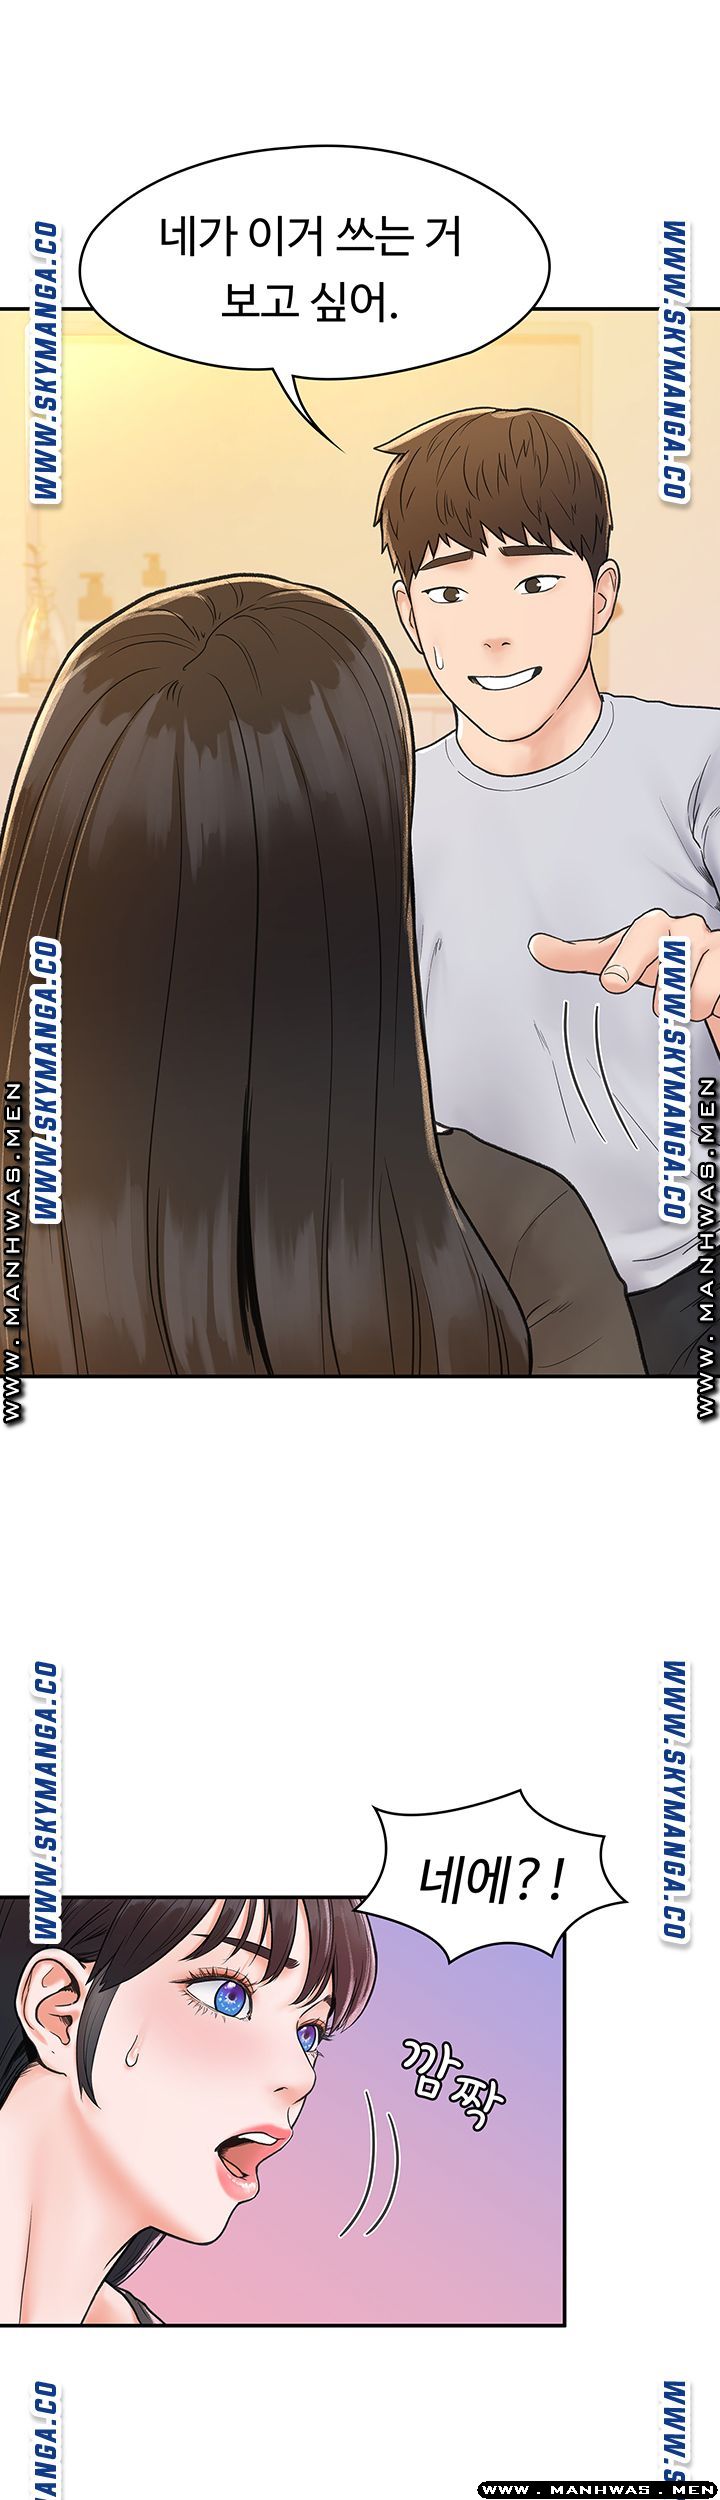 Campus Today Raw - Chapter 16 Page 1